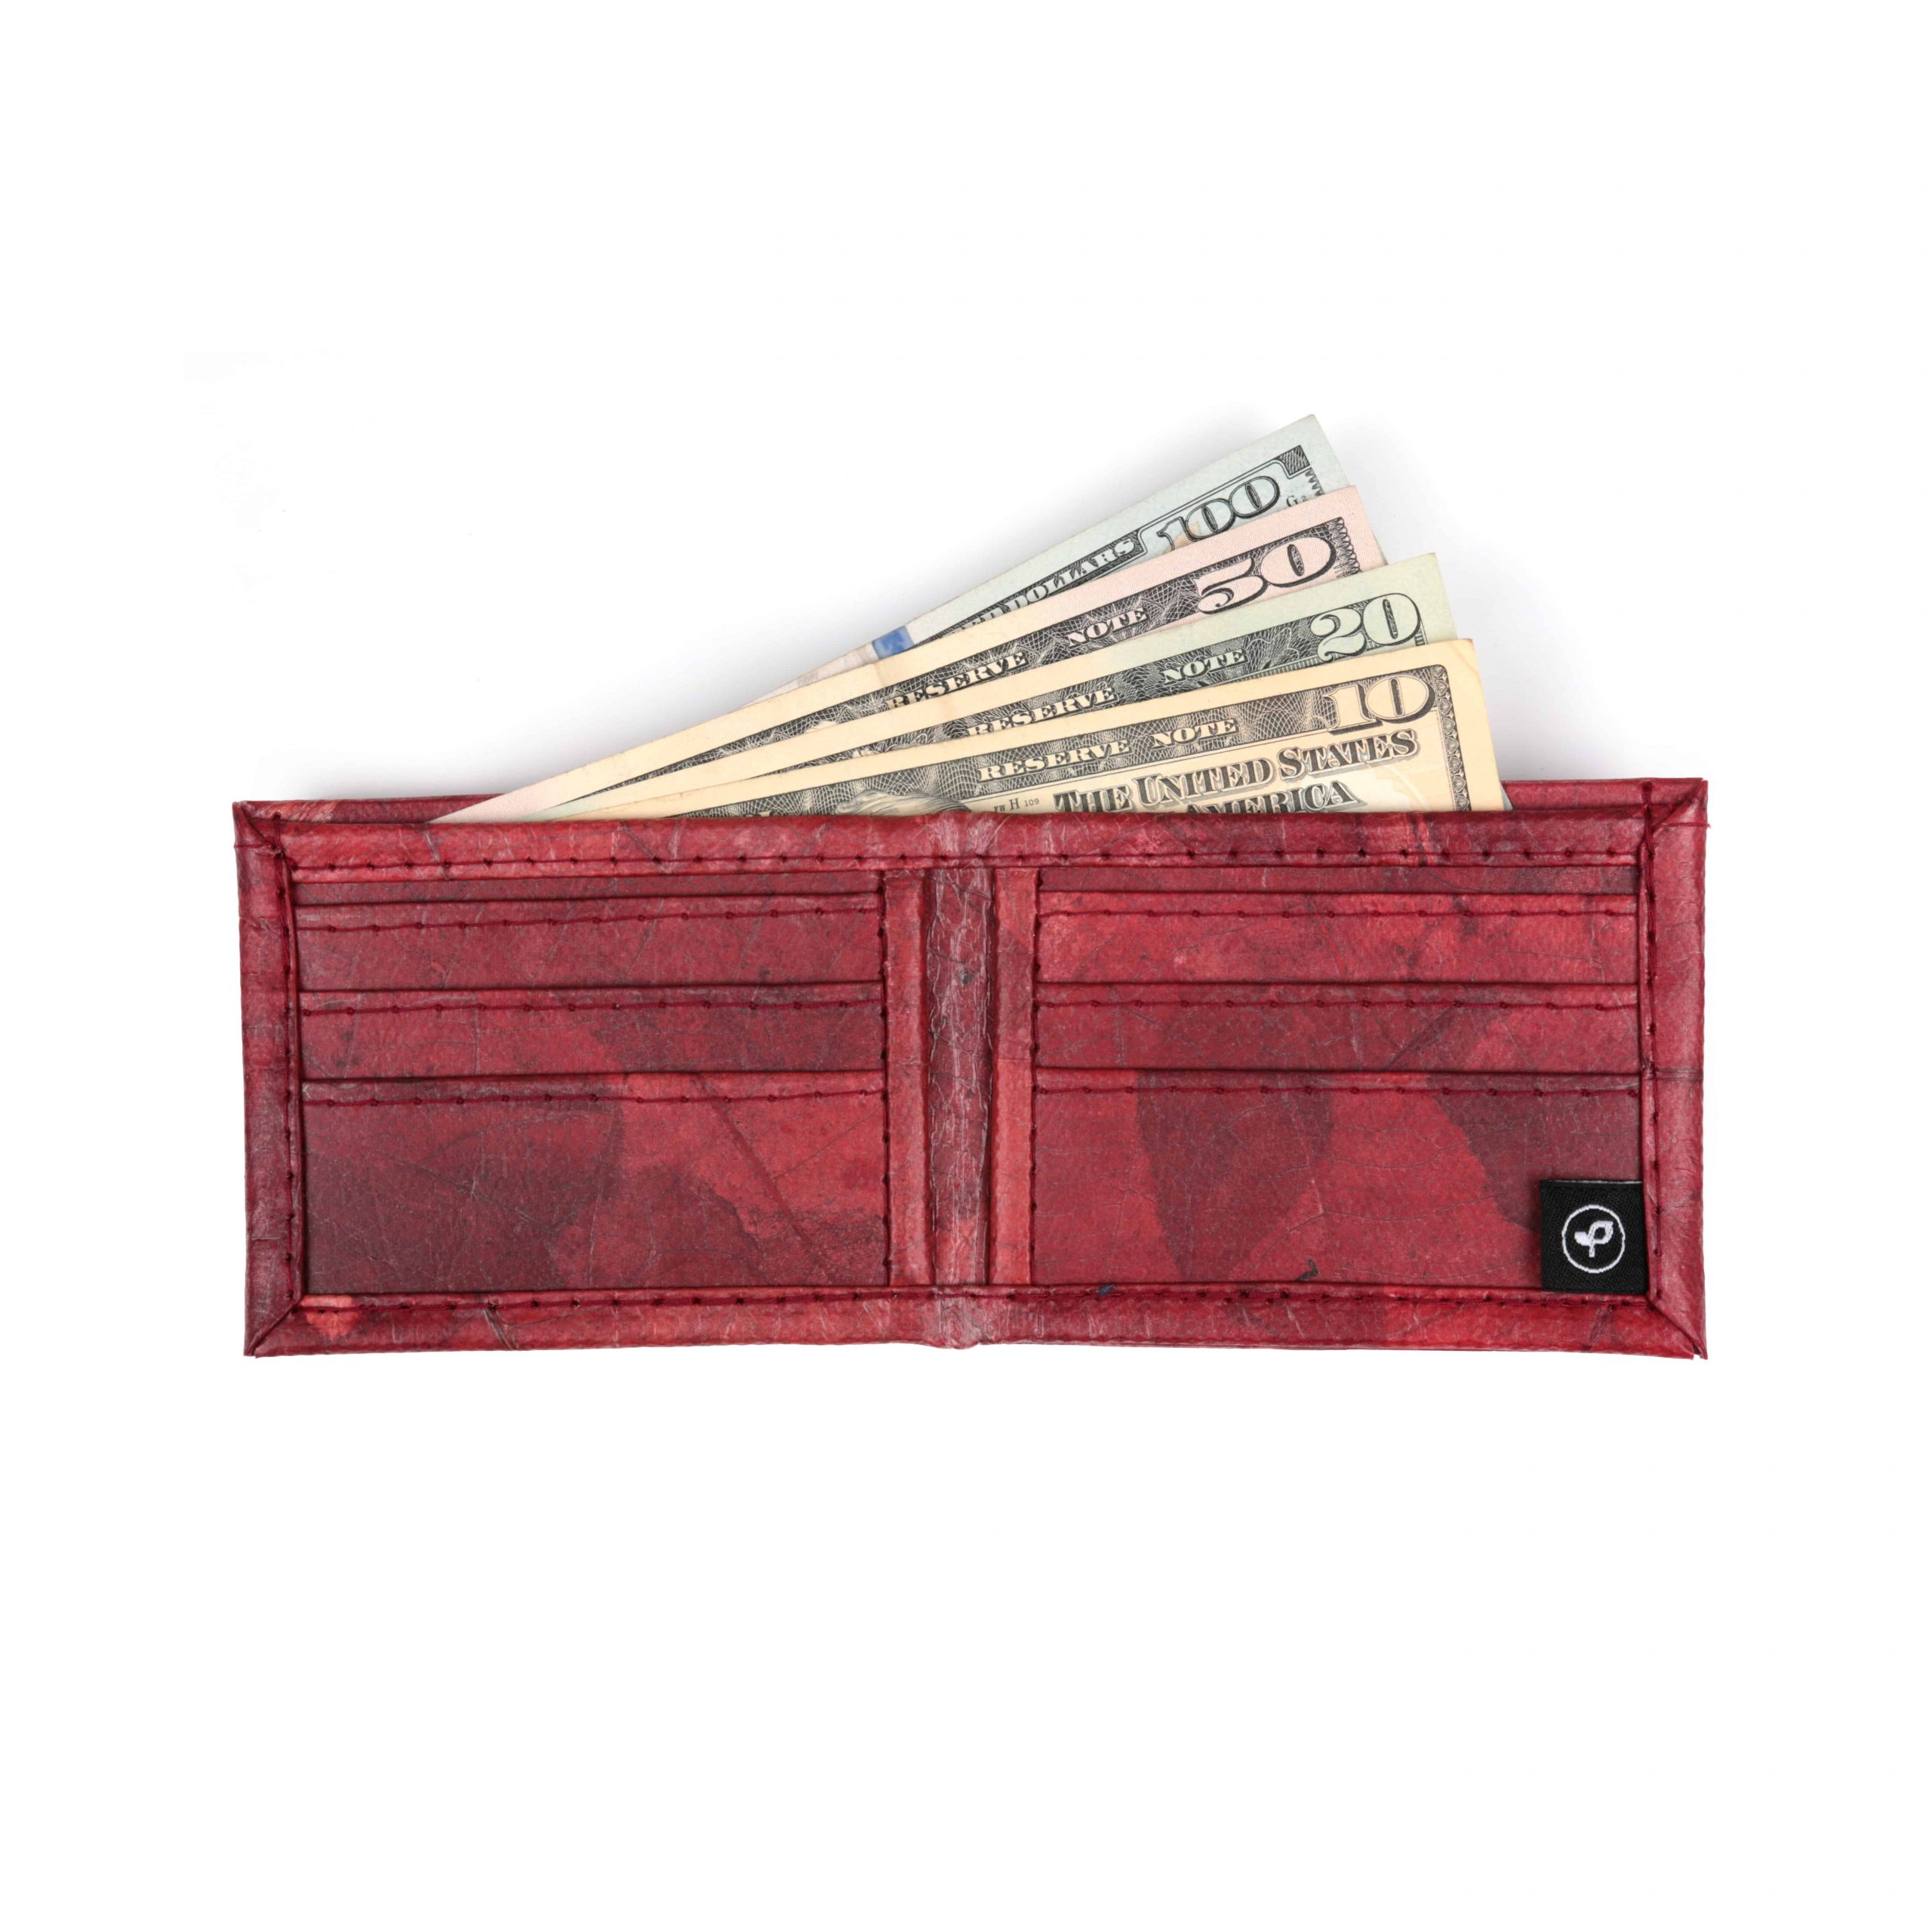 Red Vegan Leather Bifold Wallet Faux Leather Plant Based Leather Wallet Leather Alternative